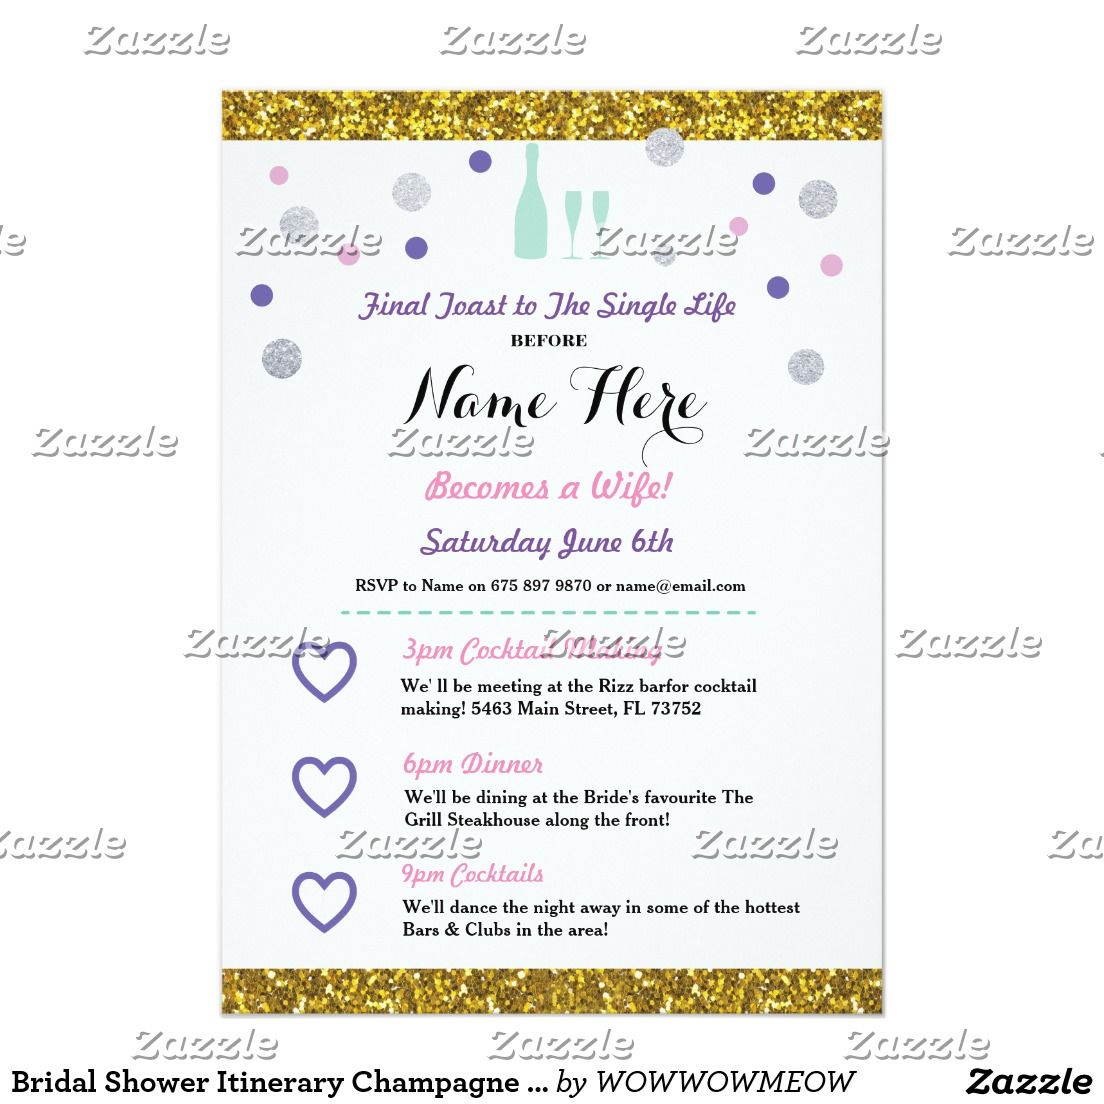 Bridal Shower Itinerary Champagne Invitation Zazzle throughout proportions 1104 X 1104